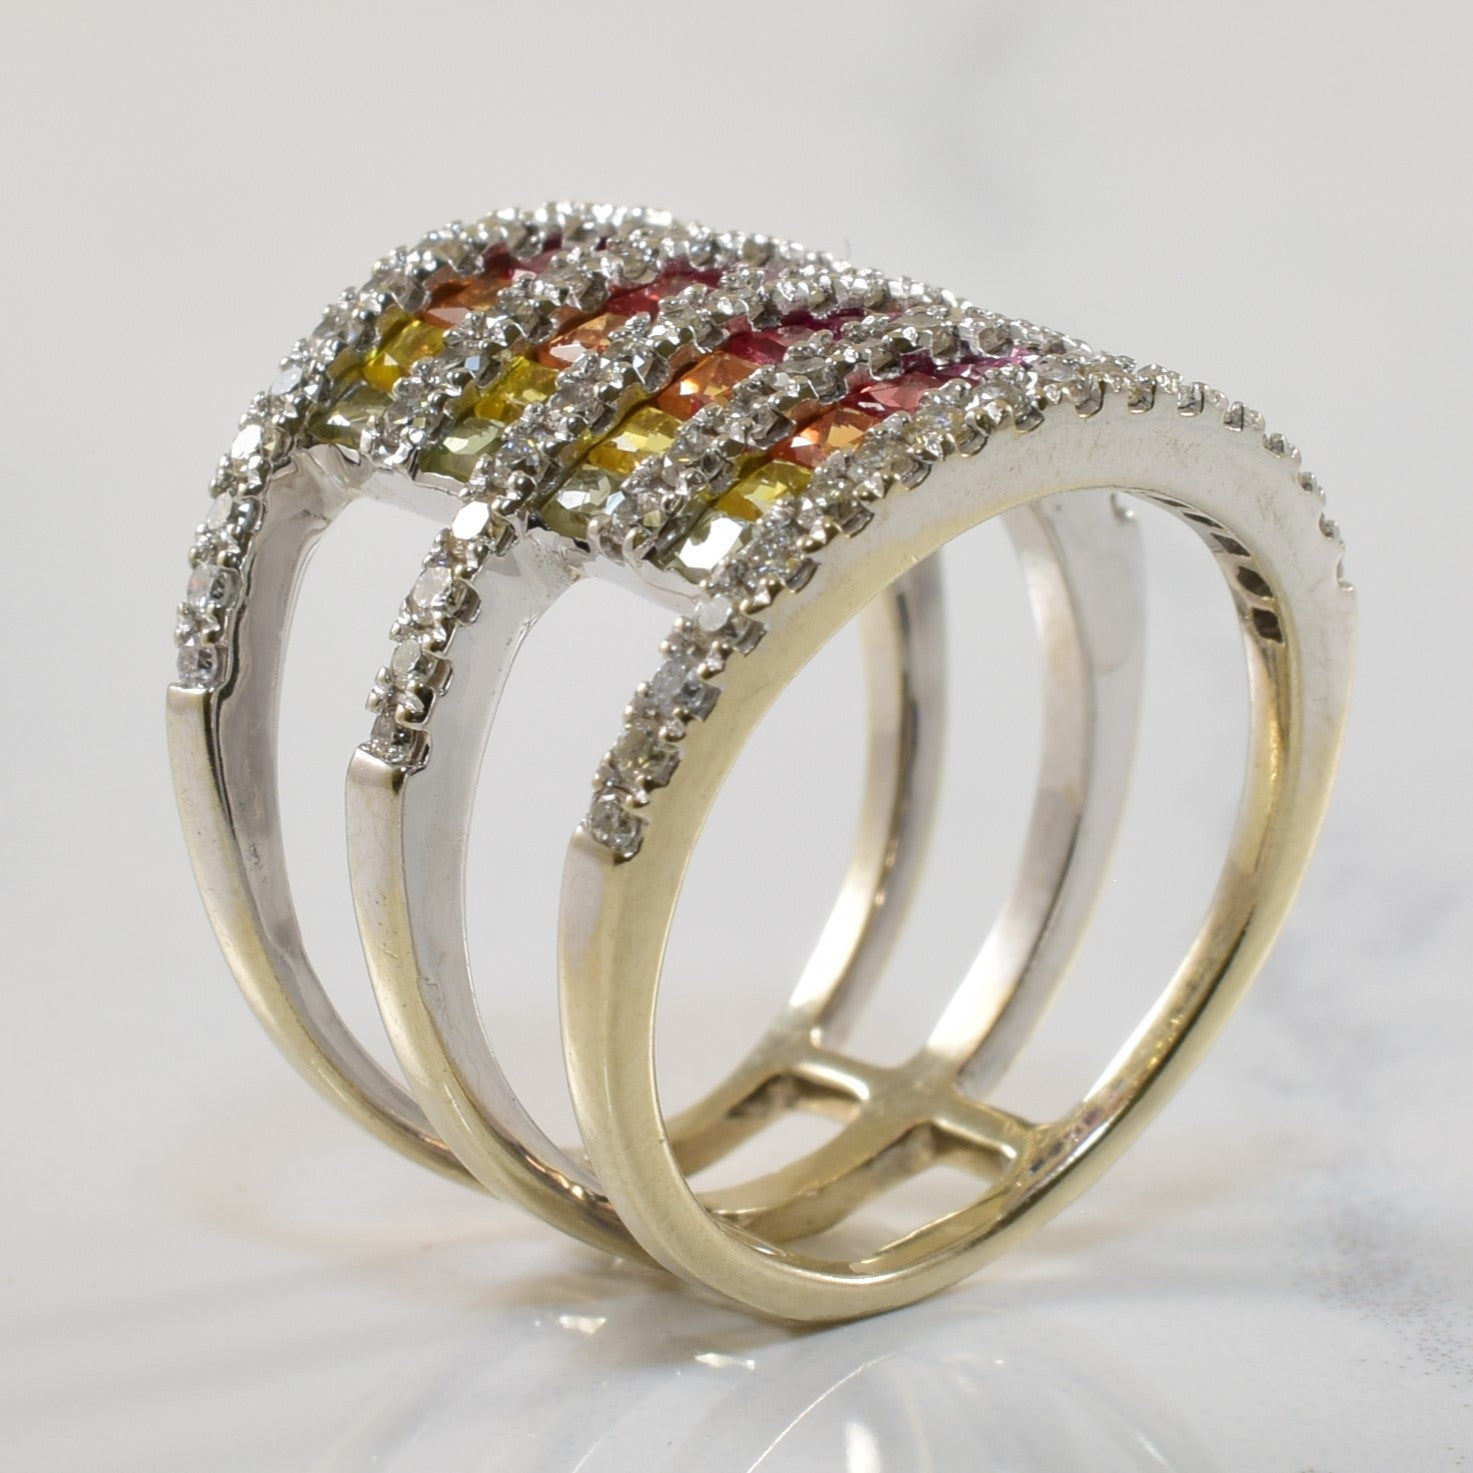 Stacked Sapphire & Ruby Ring | 2.24ctw, 0.51ctw | SZ 5.75 |